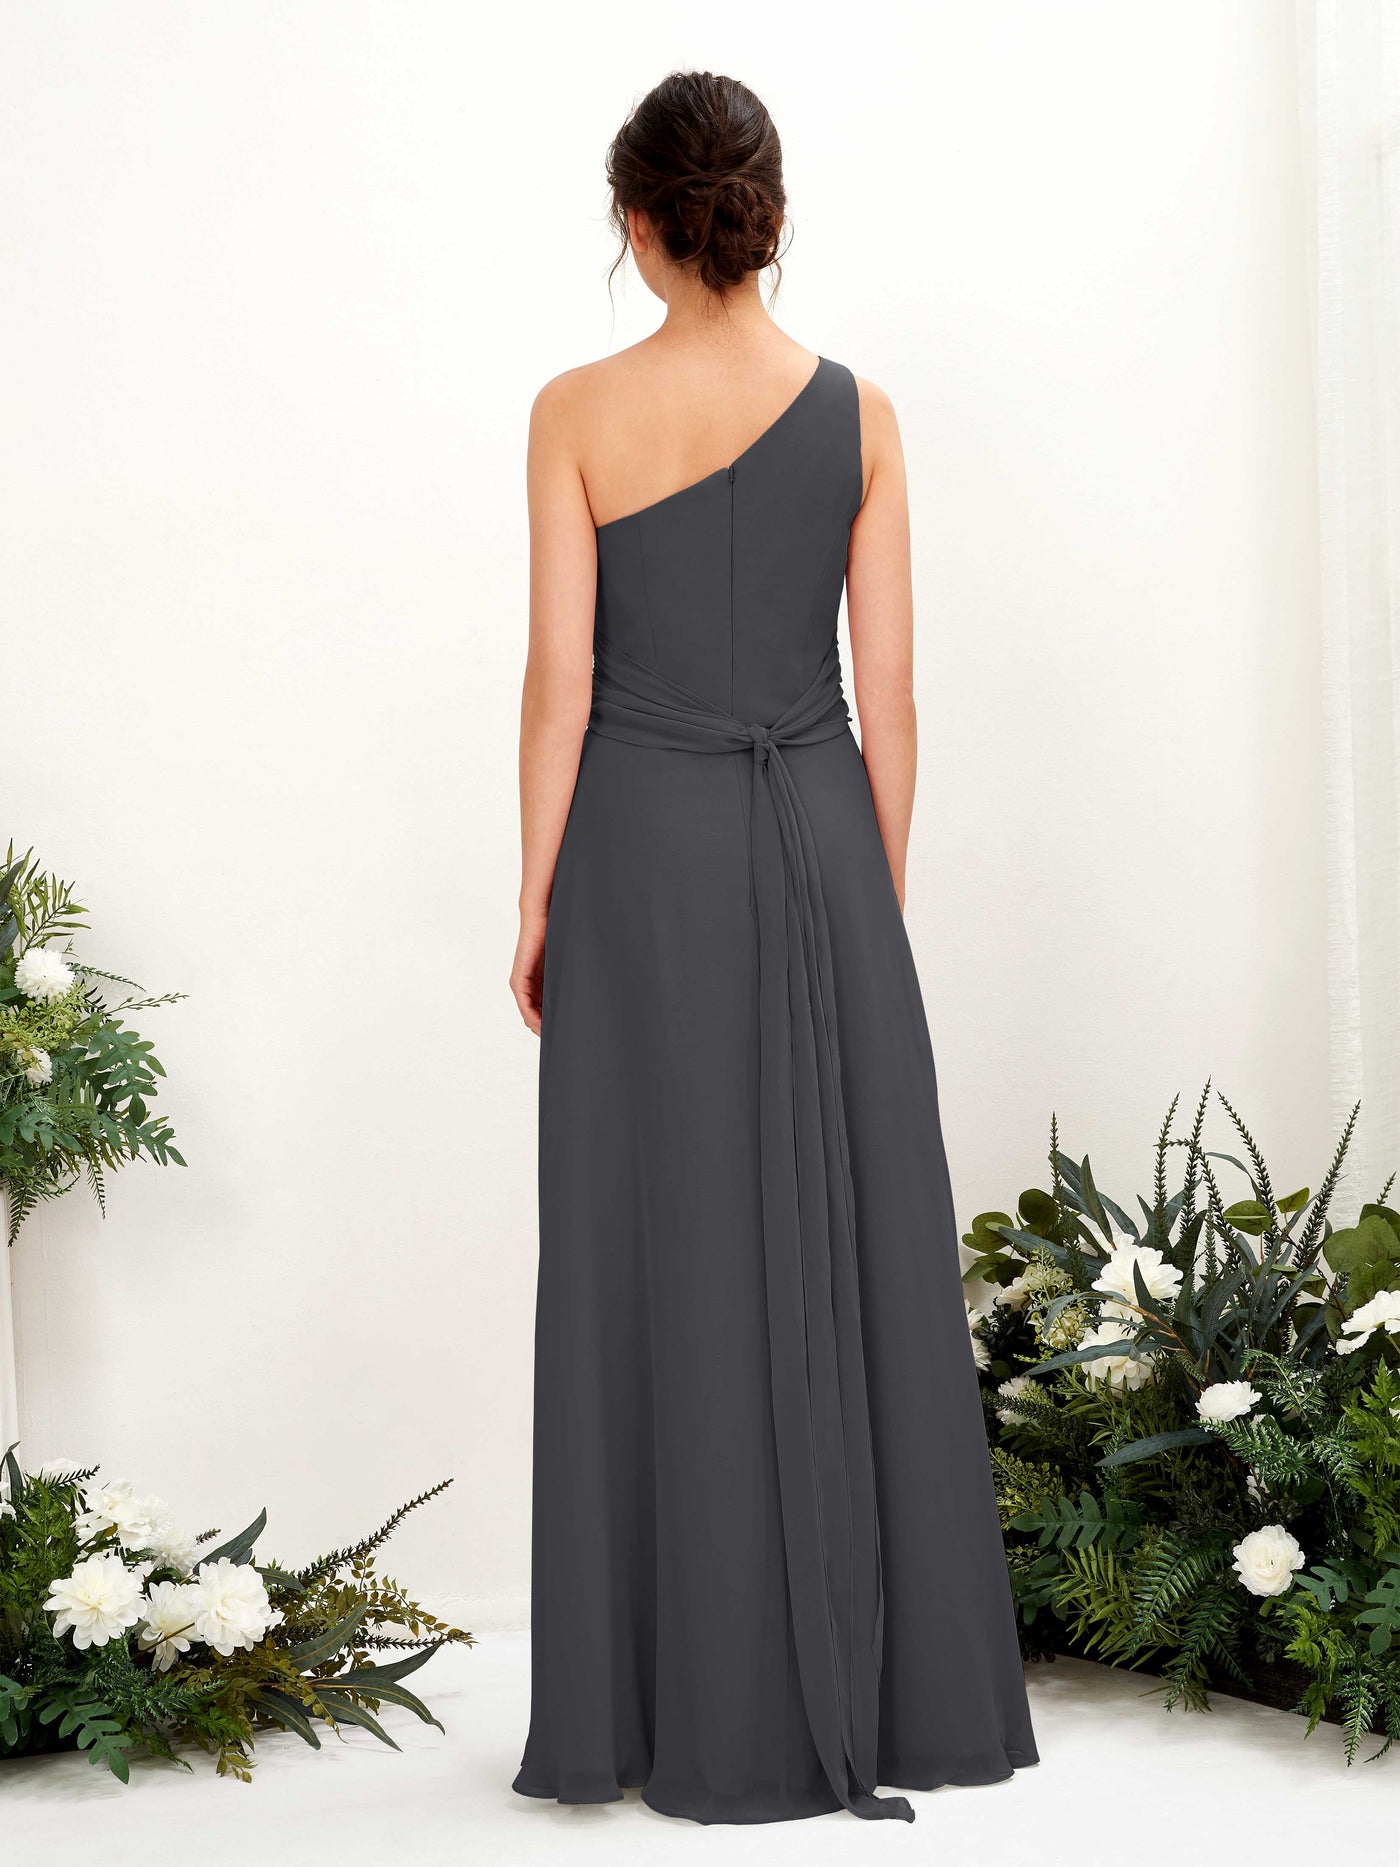 Pewter Bridesmaid Dresses Bridesmaid Dress A-line Chiffon One Shoulder Full Length Sleeveless Wedding Party Dress (81224738)#color_pewter